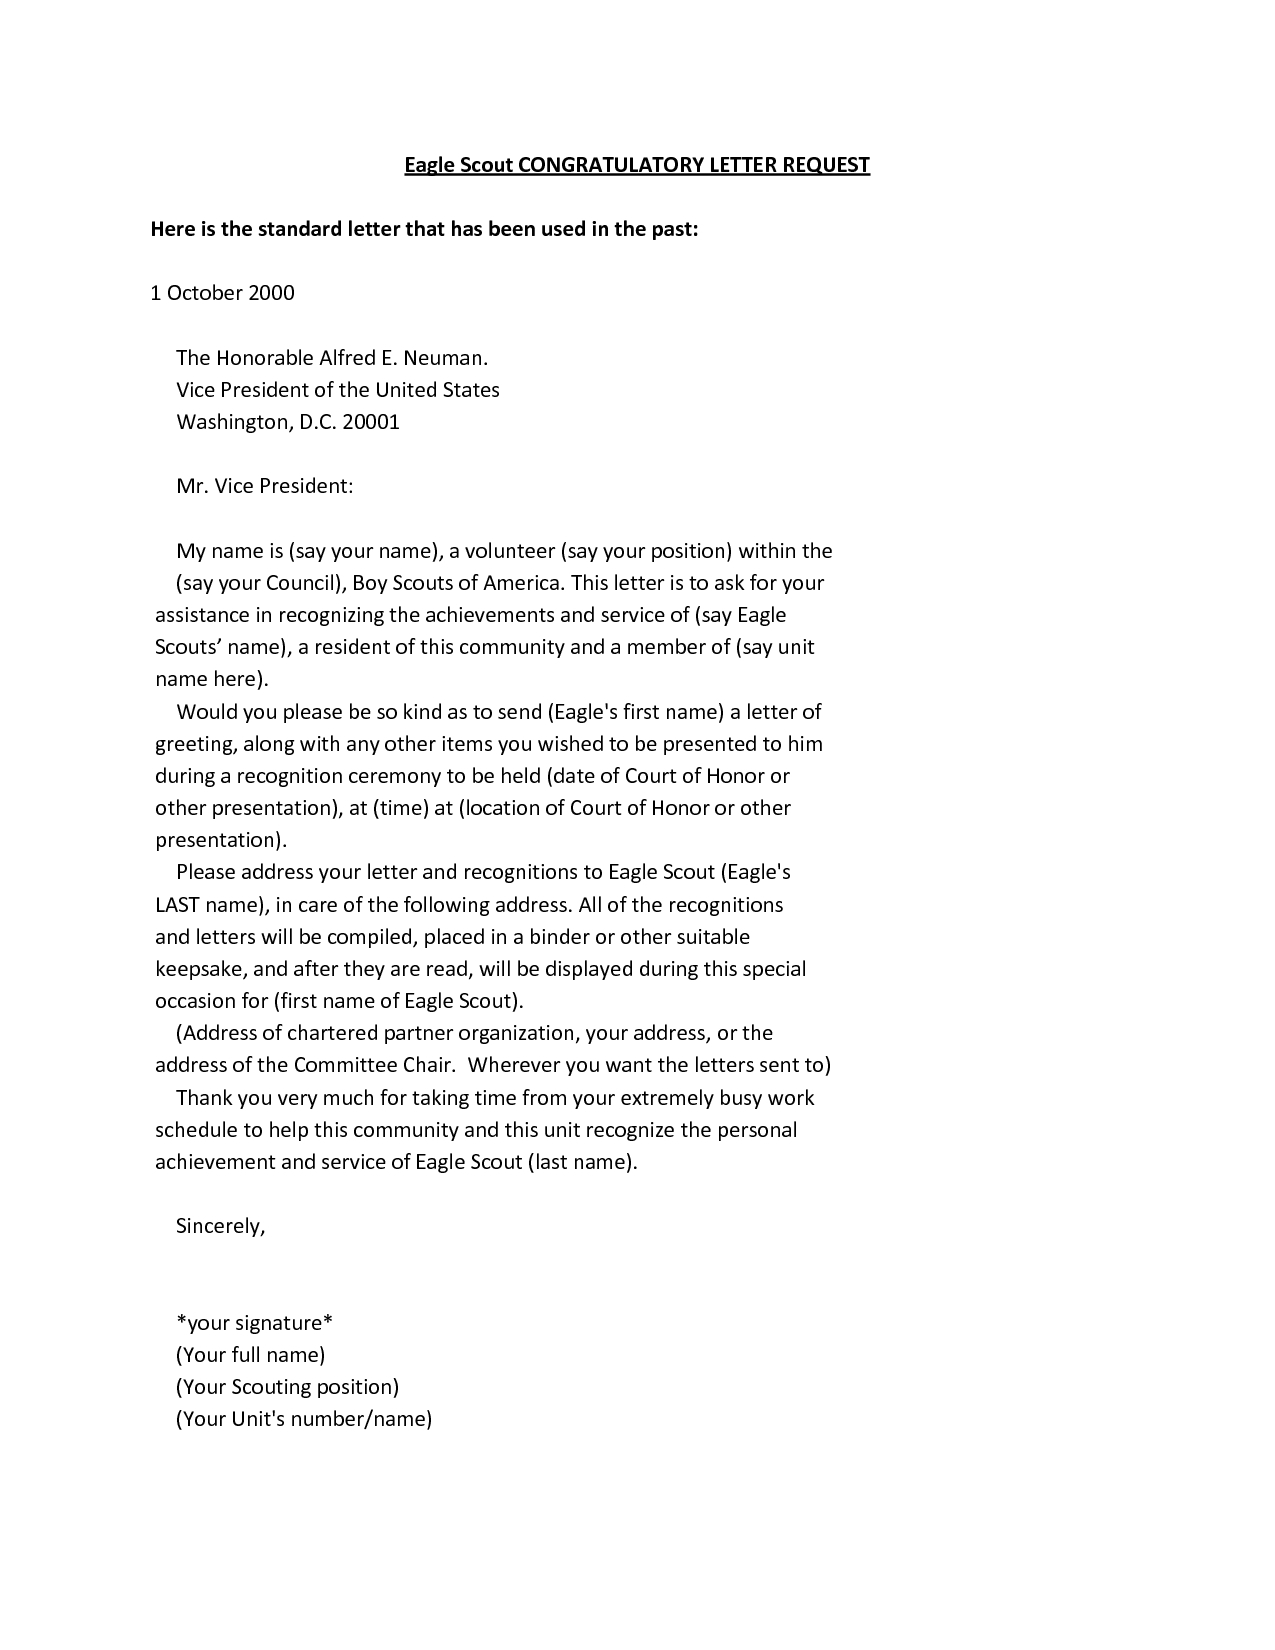 Letter to Parent Template - Eagle Scout Parent Re Mendation Letter Template Acurnamedia